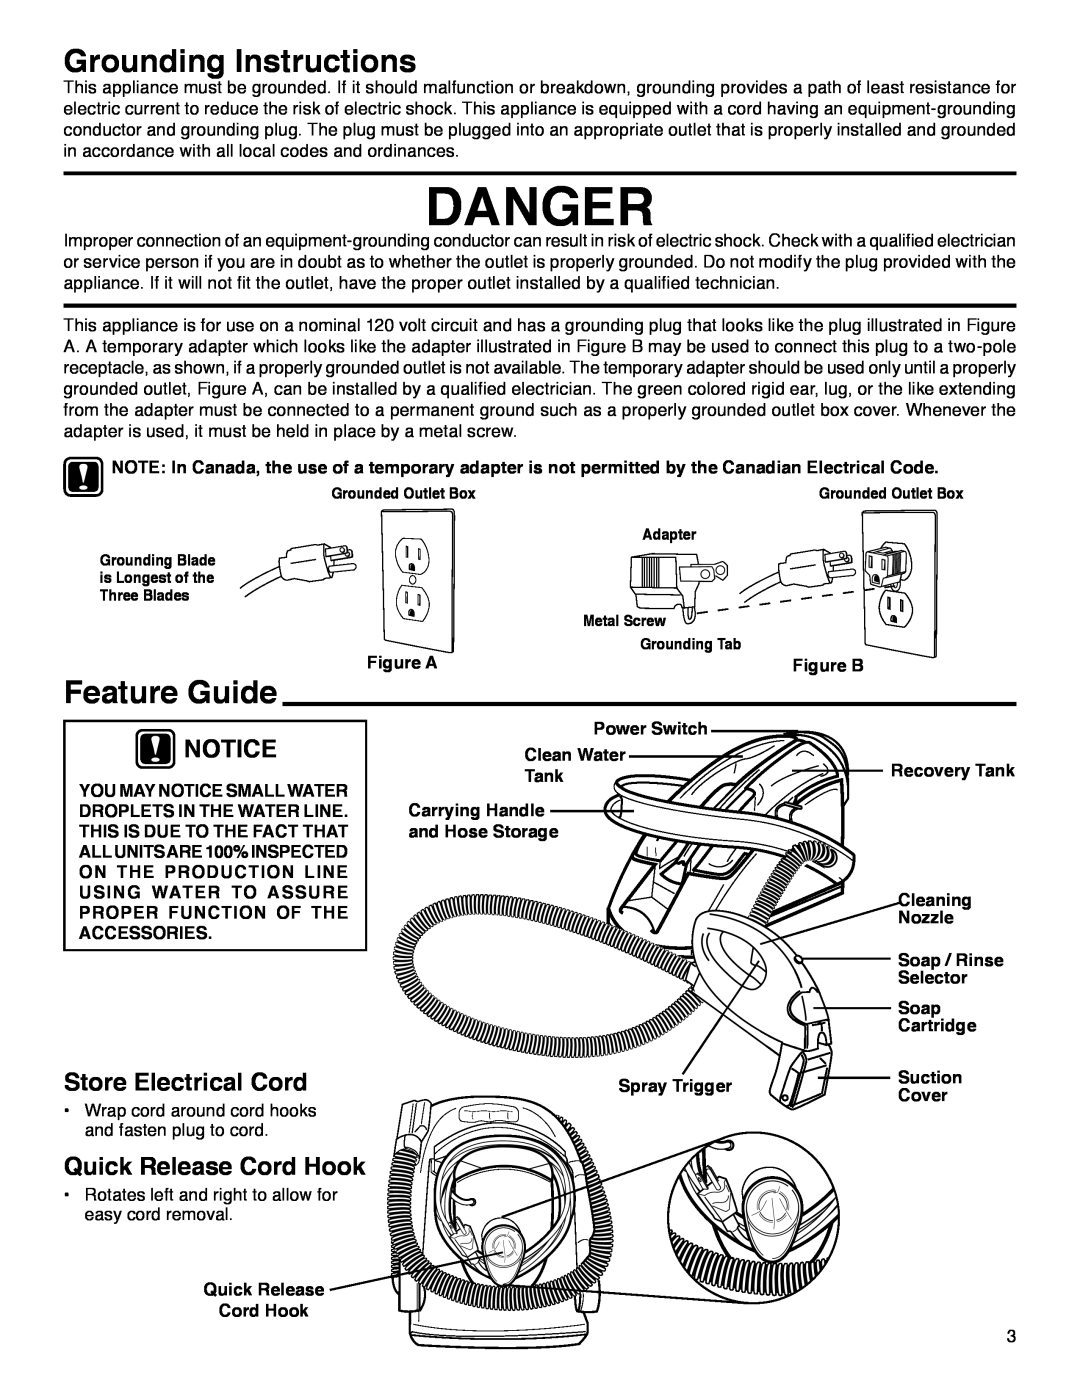 Eureka 2550 manual Grounding Instructions, Feature Guide, Store Electrical Cord, Quick Release Cord Hook, Danger 